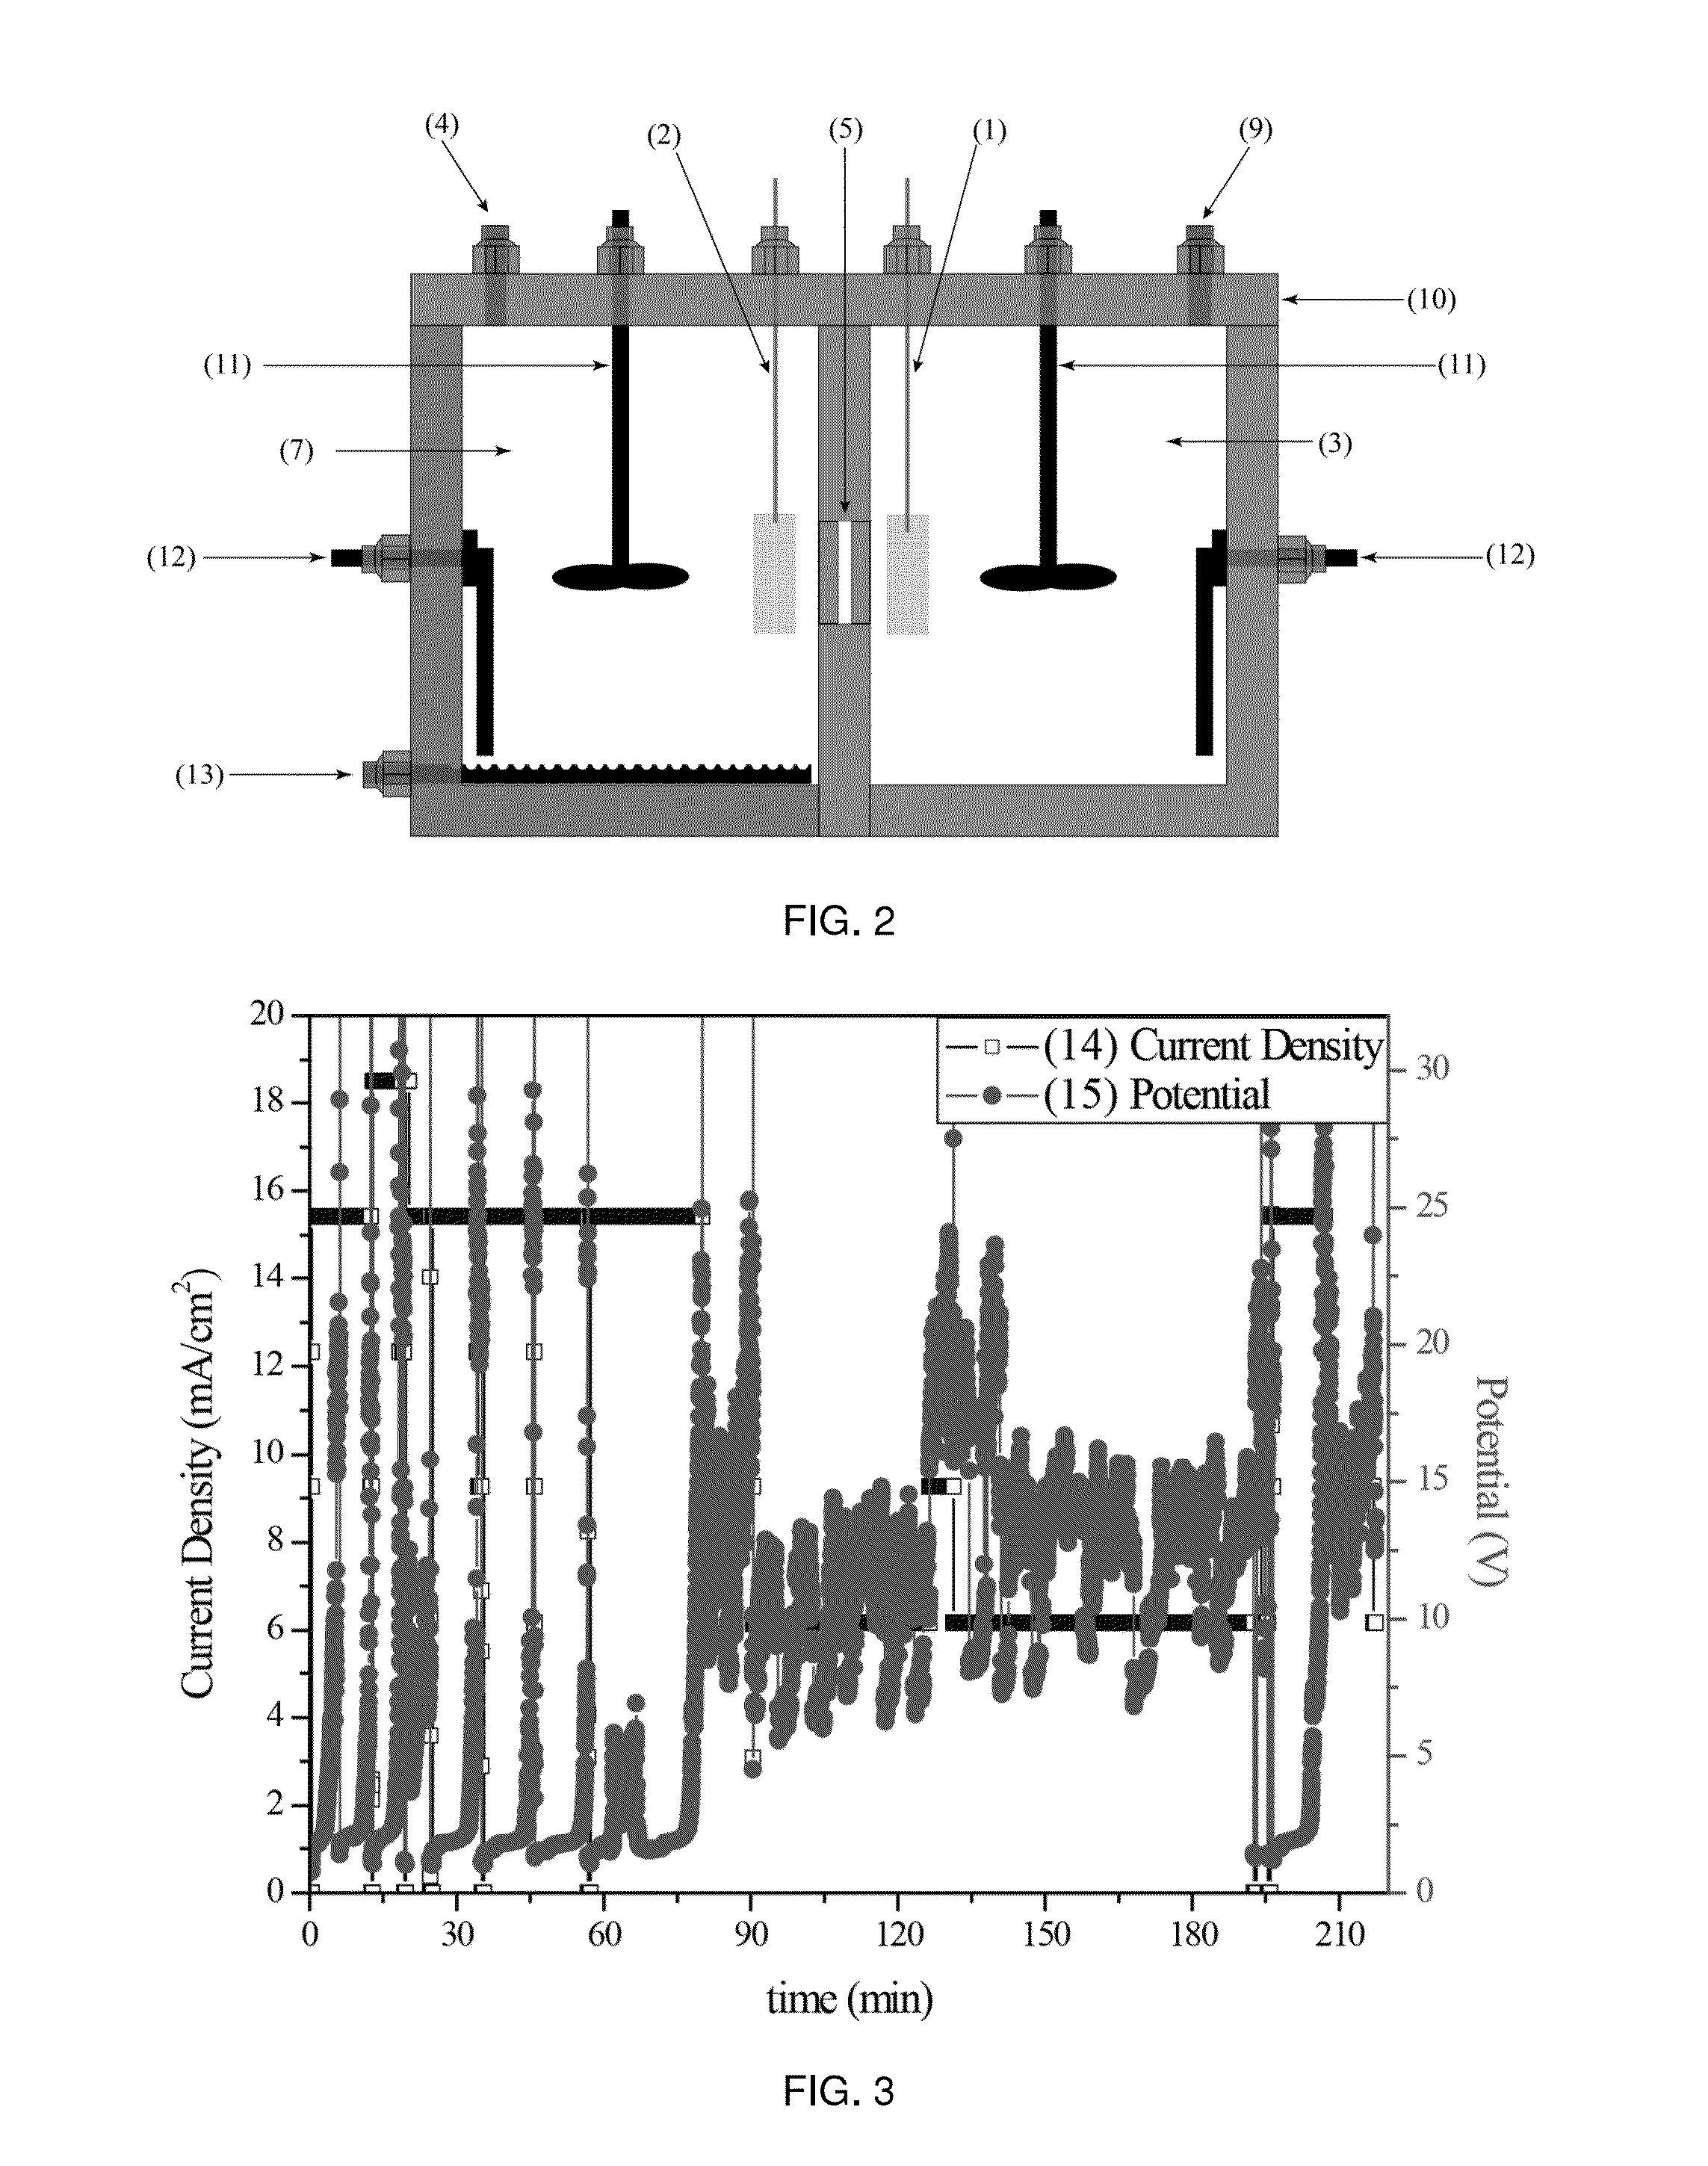 Molten Carboxylate Electrolytes for Electrochemical Decarboxylation Processes